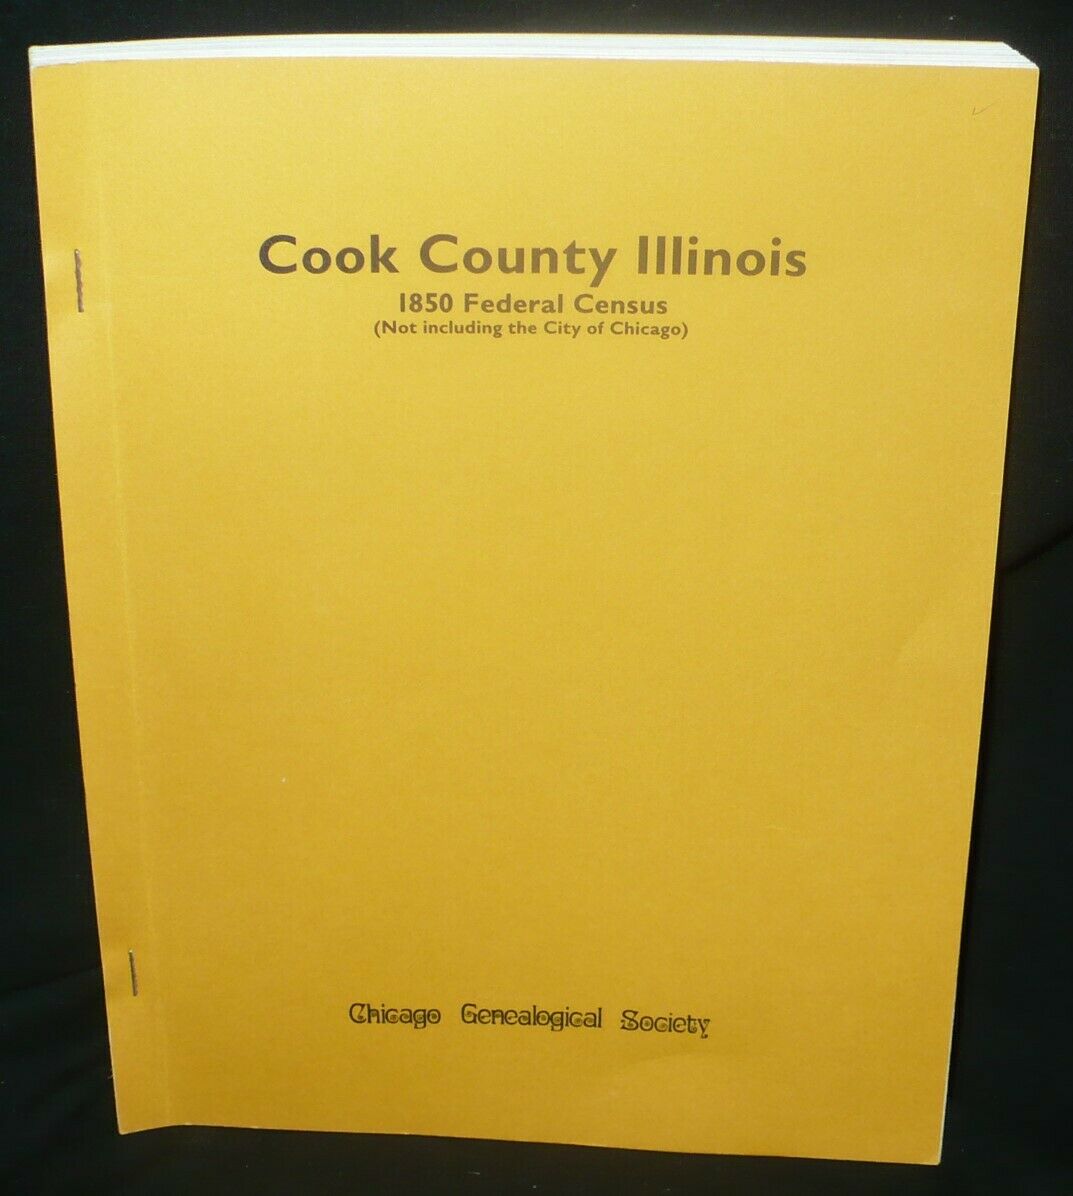 Cook County Illinios 1850 Federal Census Chicago Genealogical Society 1987